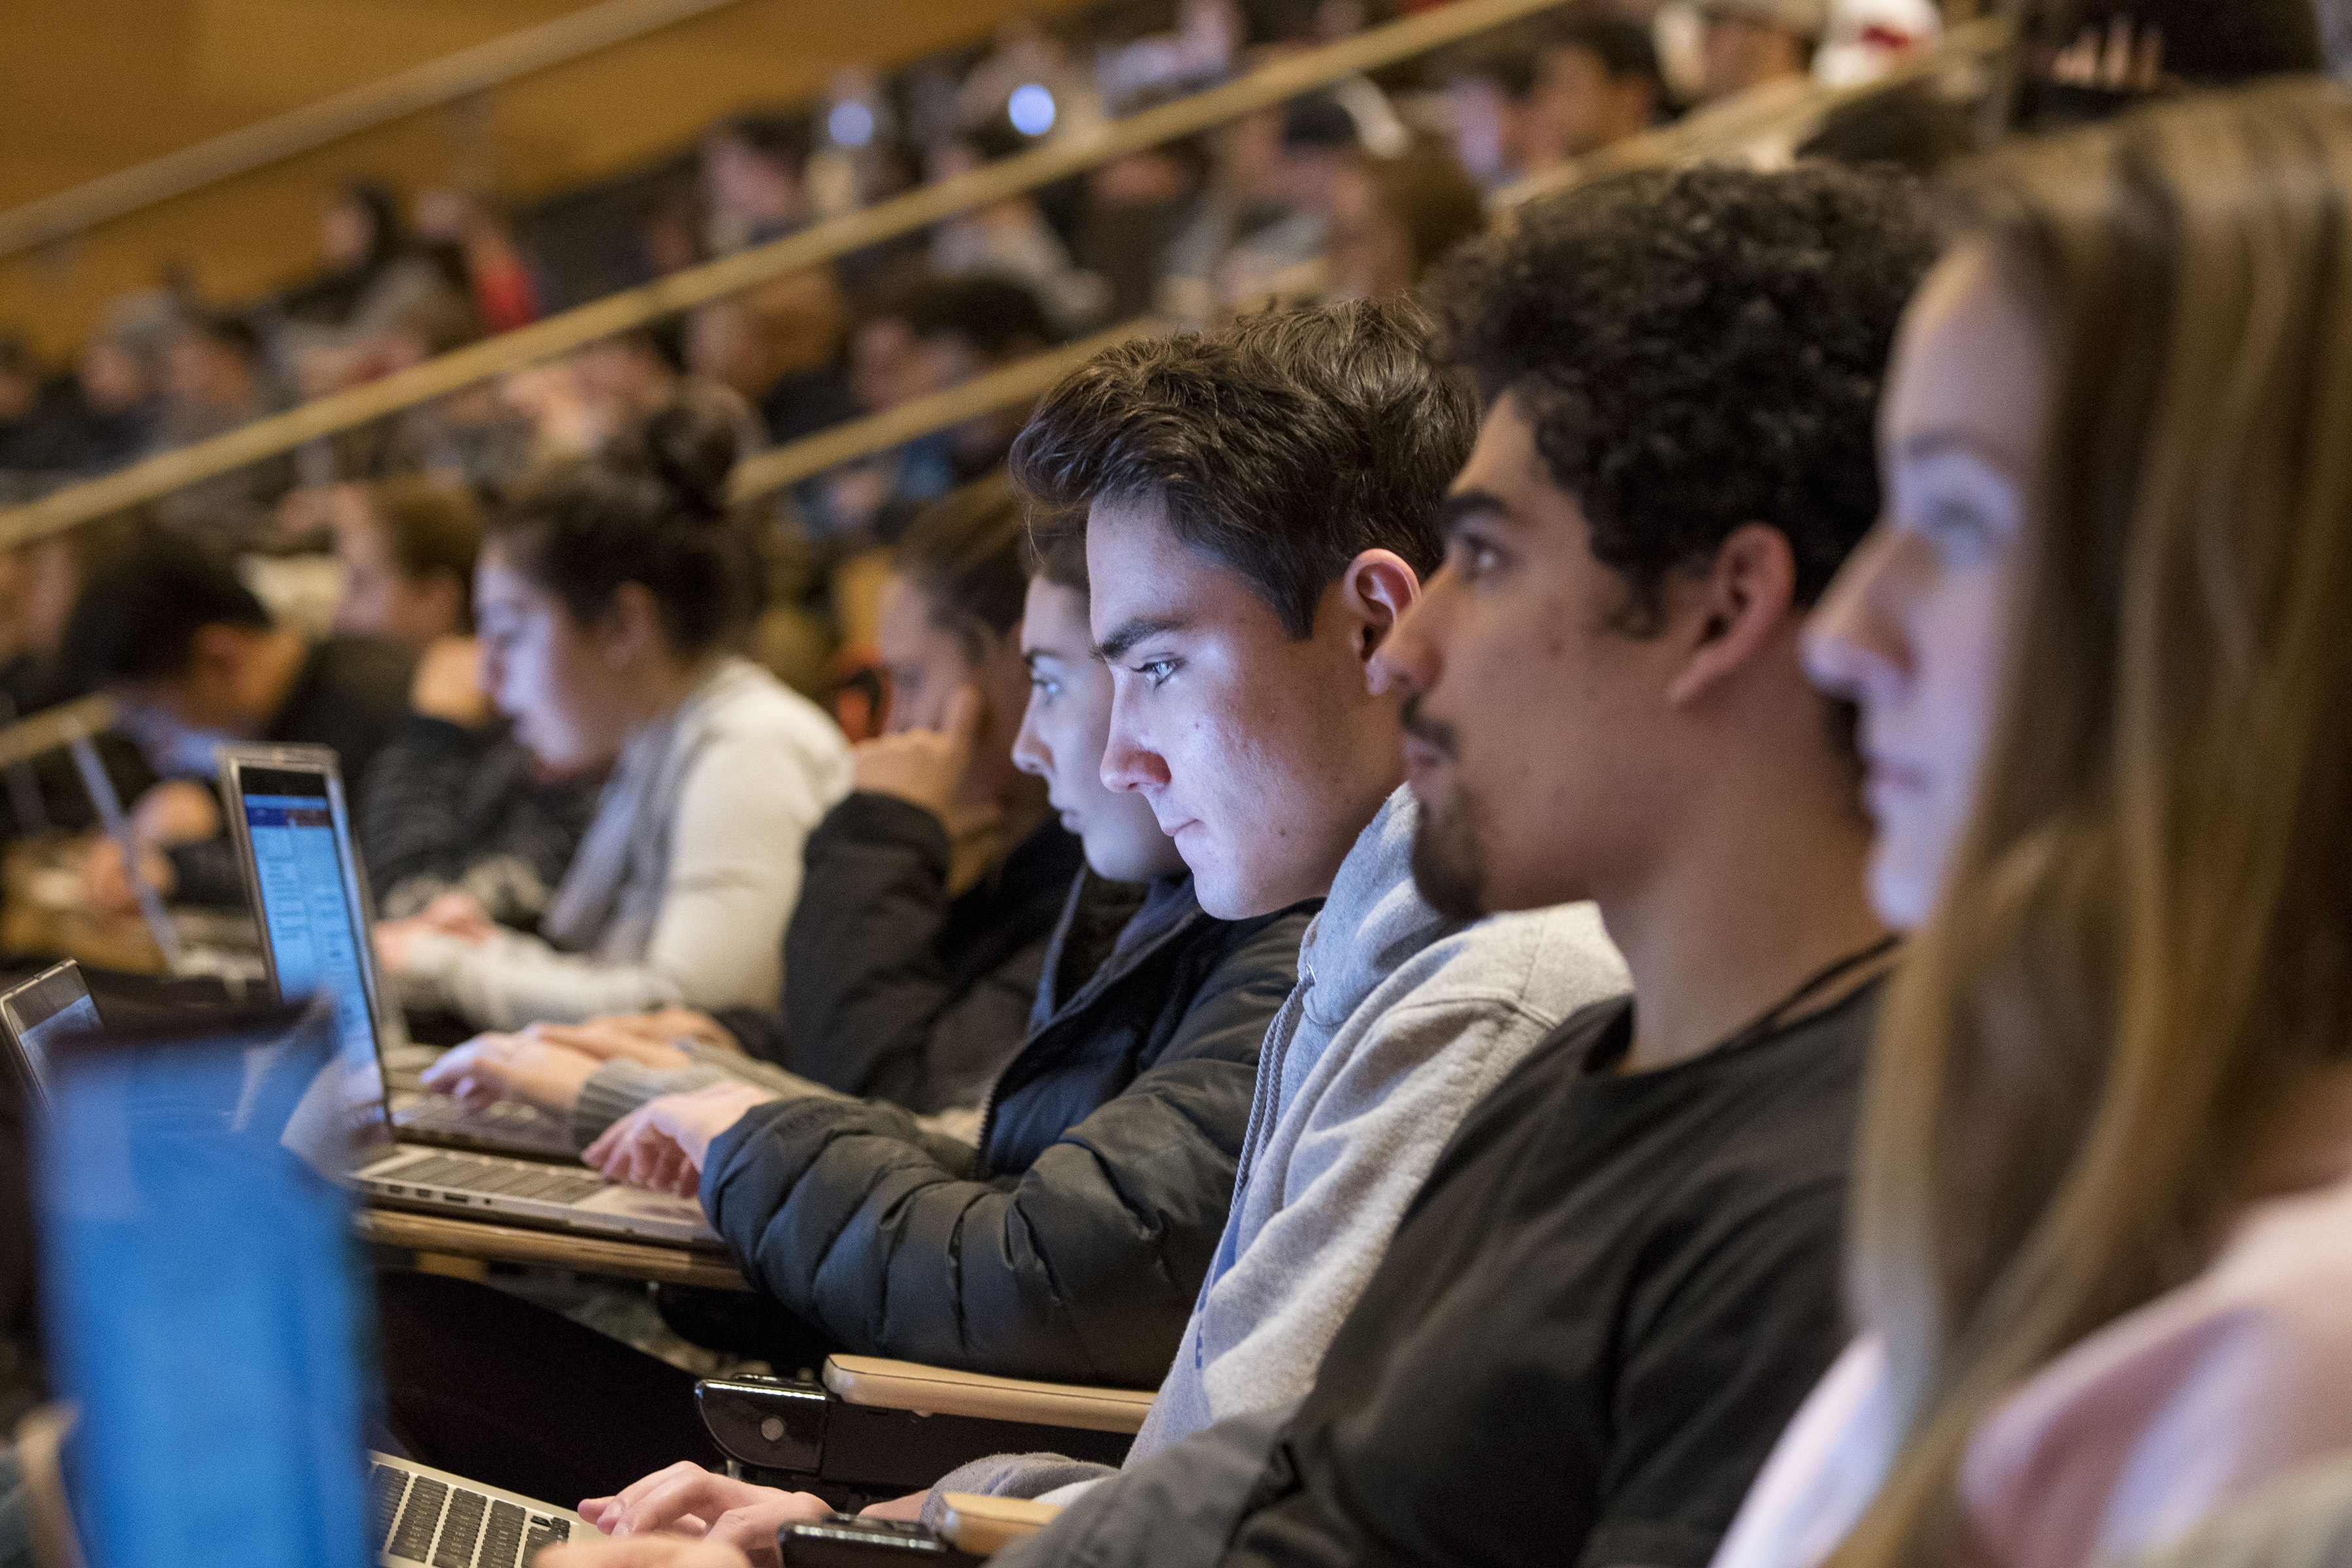 Students listening to a lecture in Laurel Hall on Feb. 8, 2018. (Sean Flynn/UConn Photo)